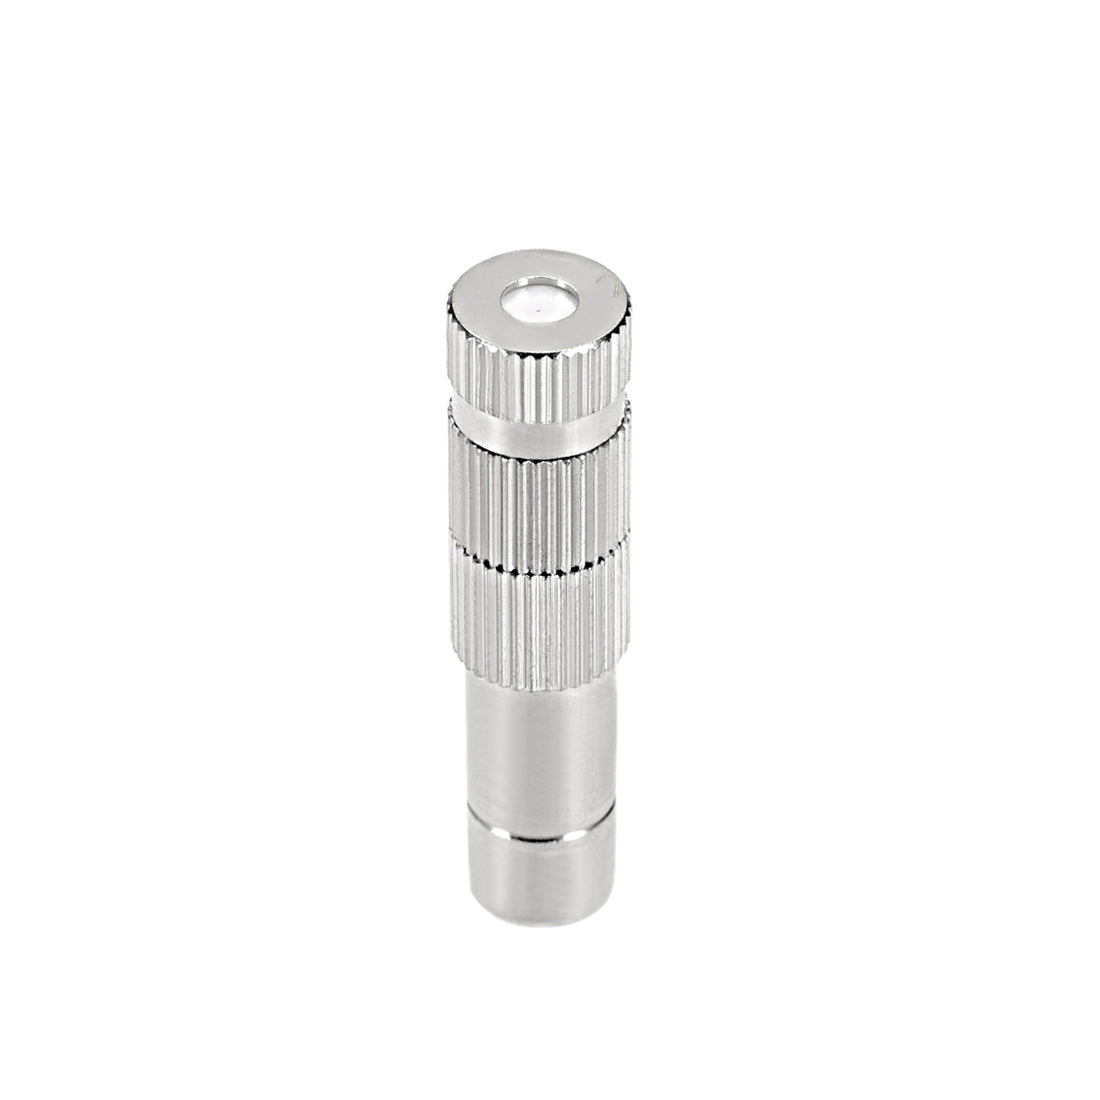 Uxcell Uxcell Brass Misting Nozzle 0.008-inch 0.2mm Orifice for 6mm Connector 39mm Length 2Pcs